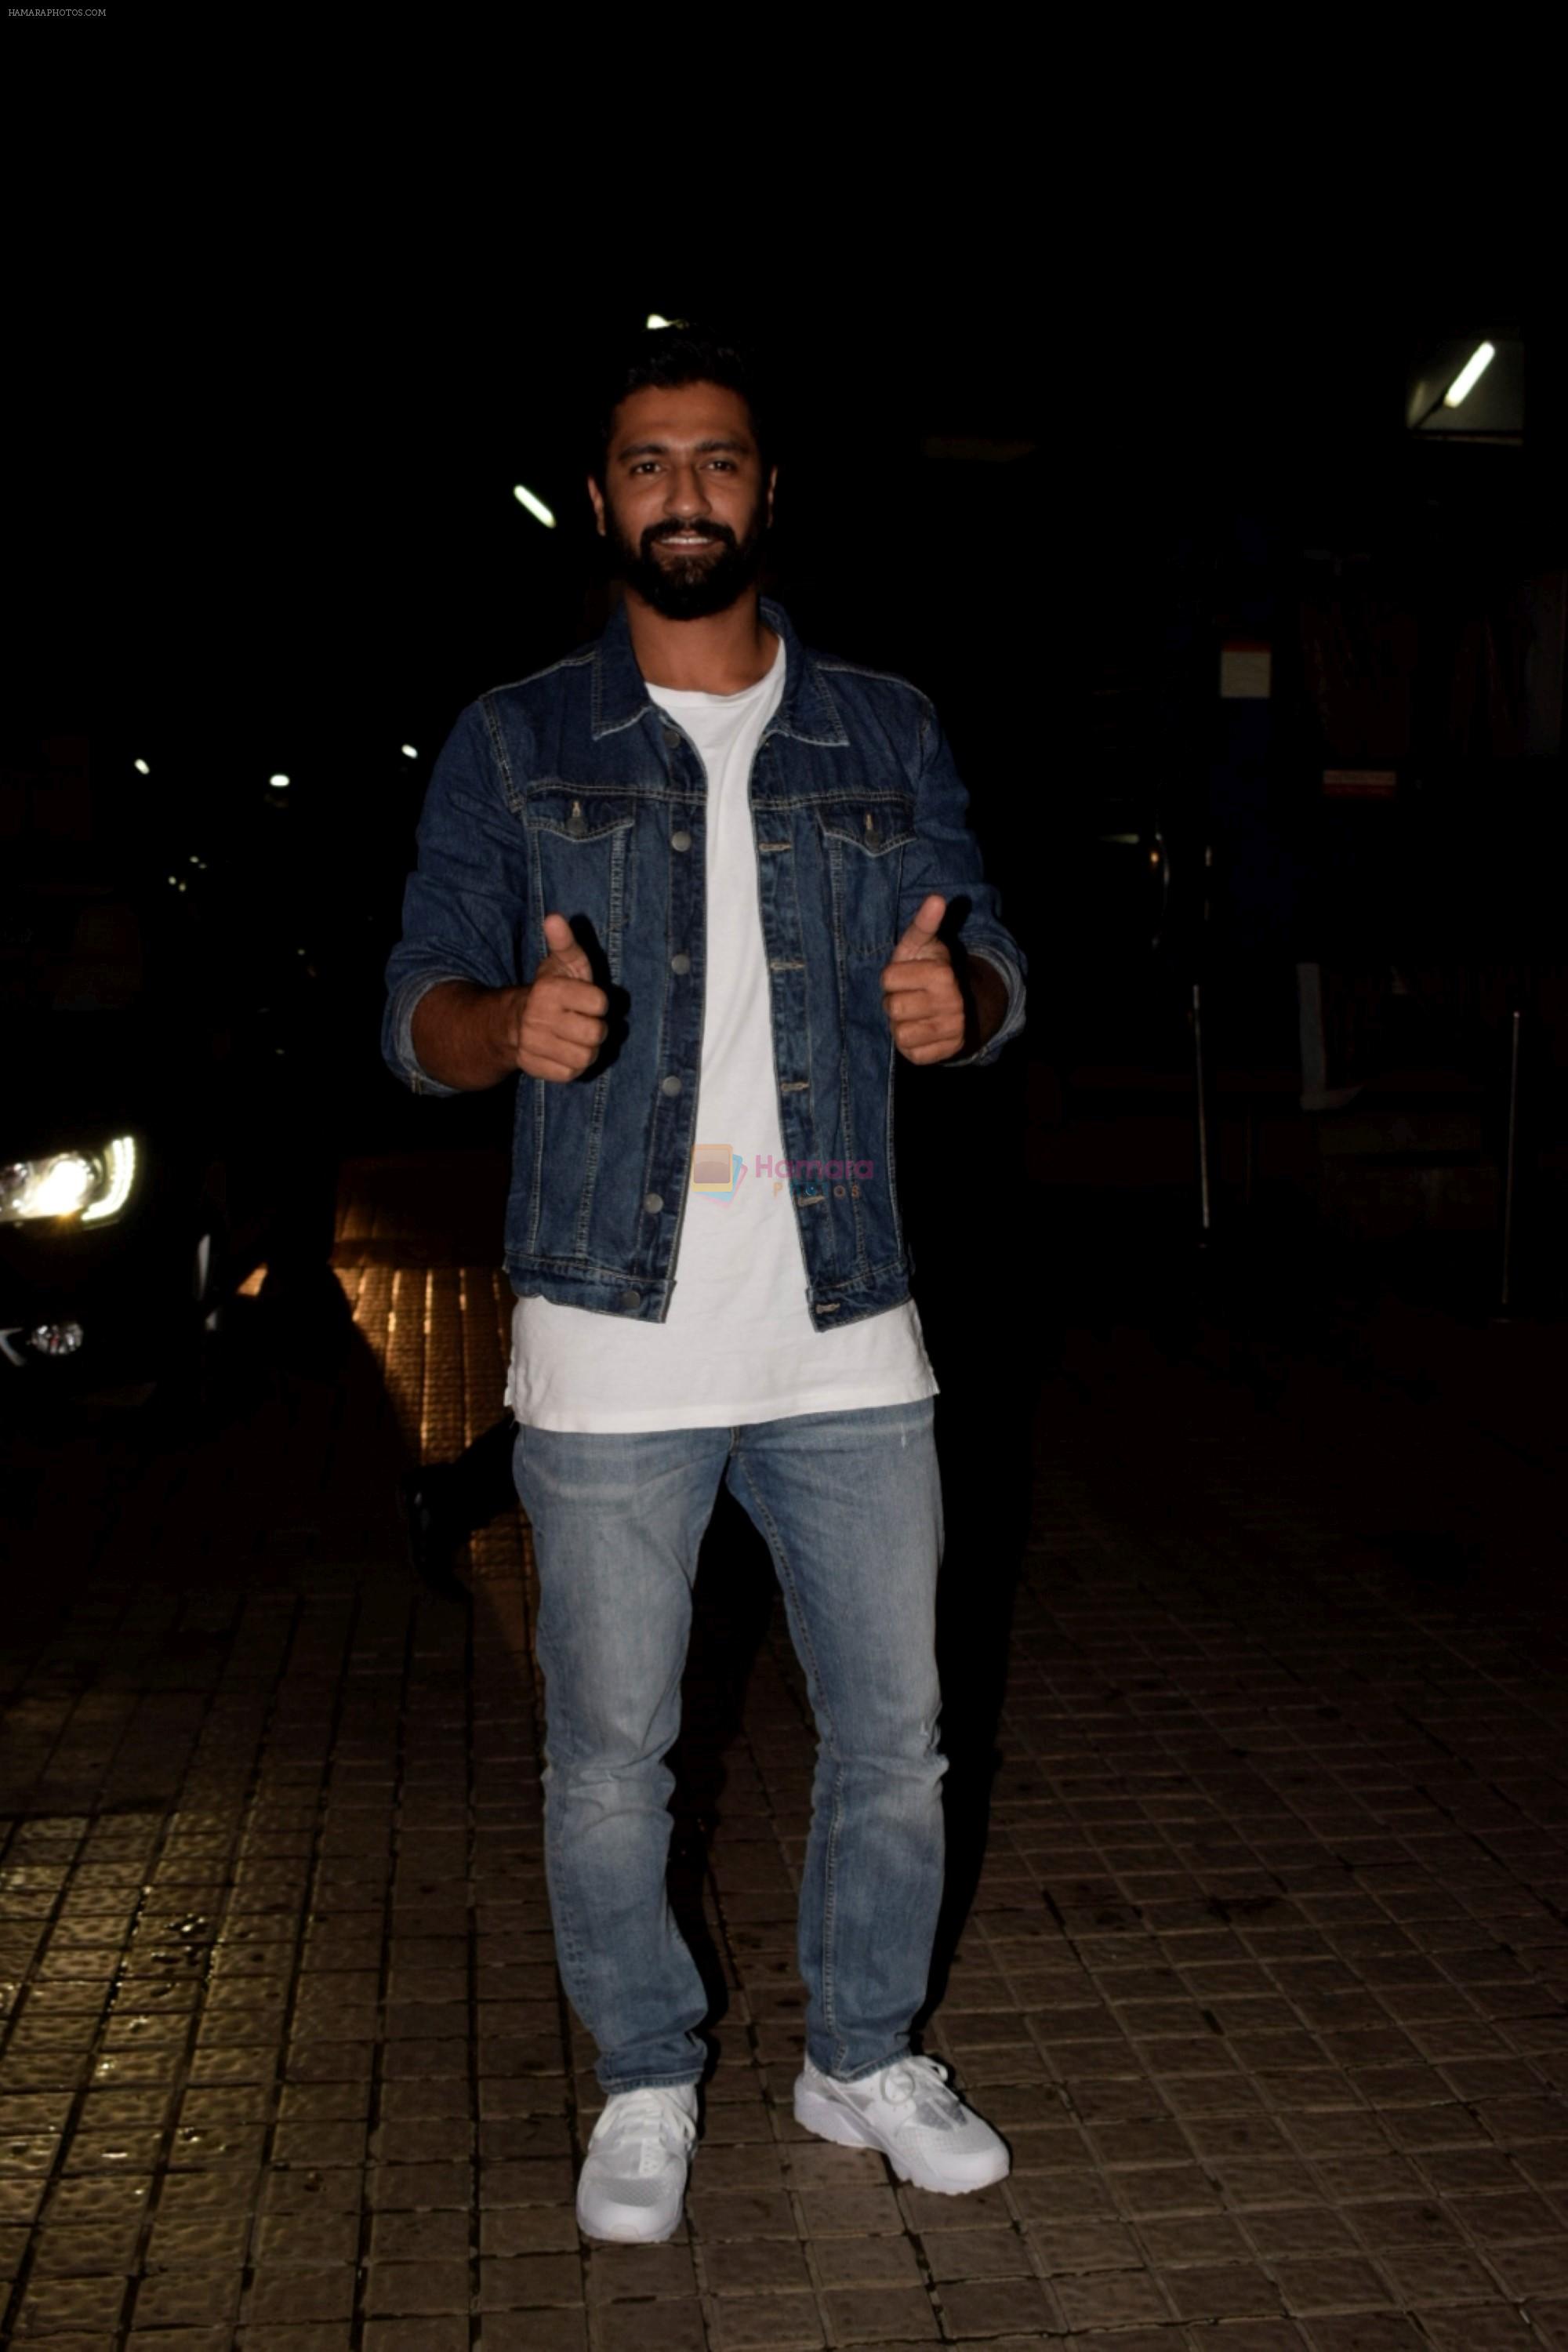 Vicky Kaushal at the Screening of Gold in pvr juhu on 14th Aug 2018